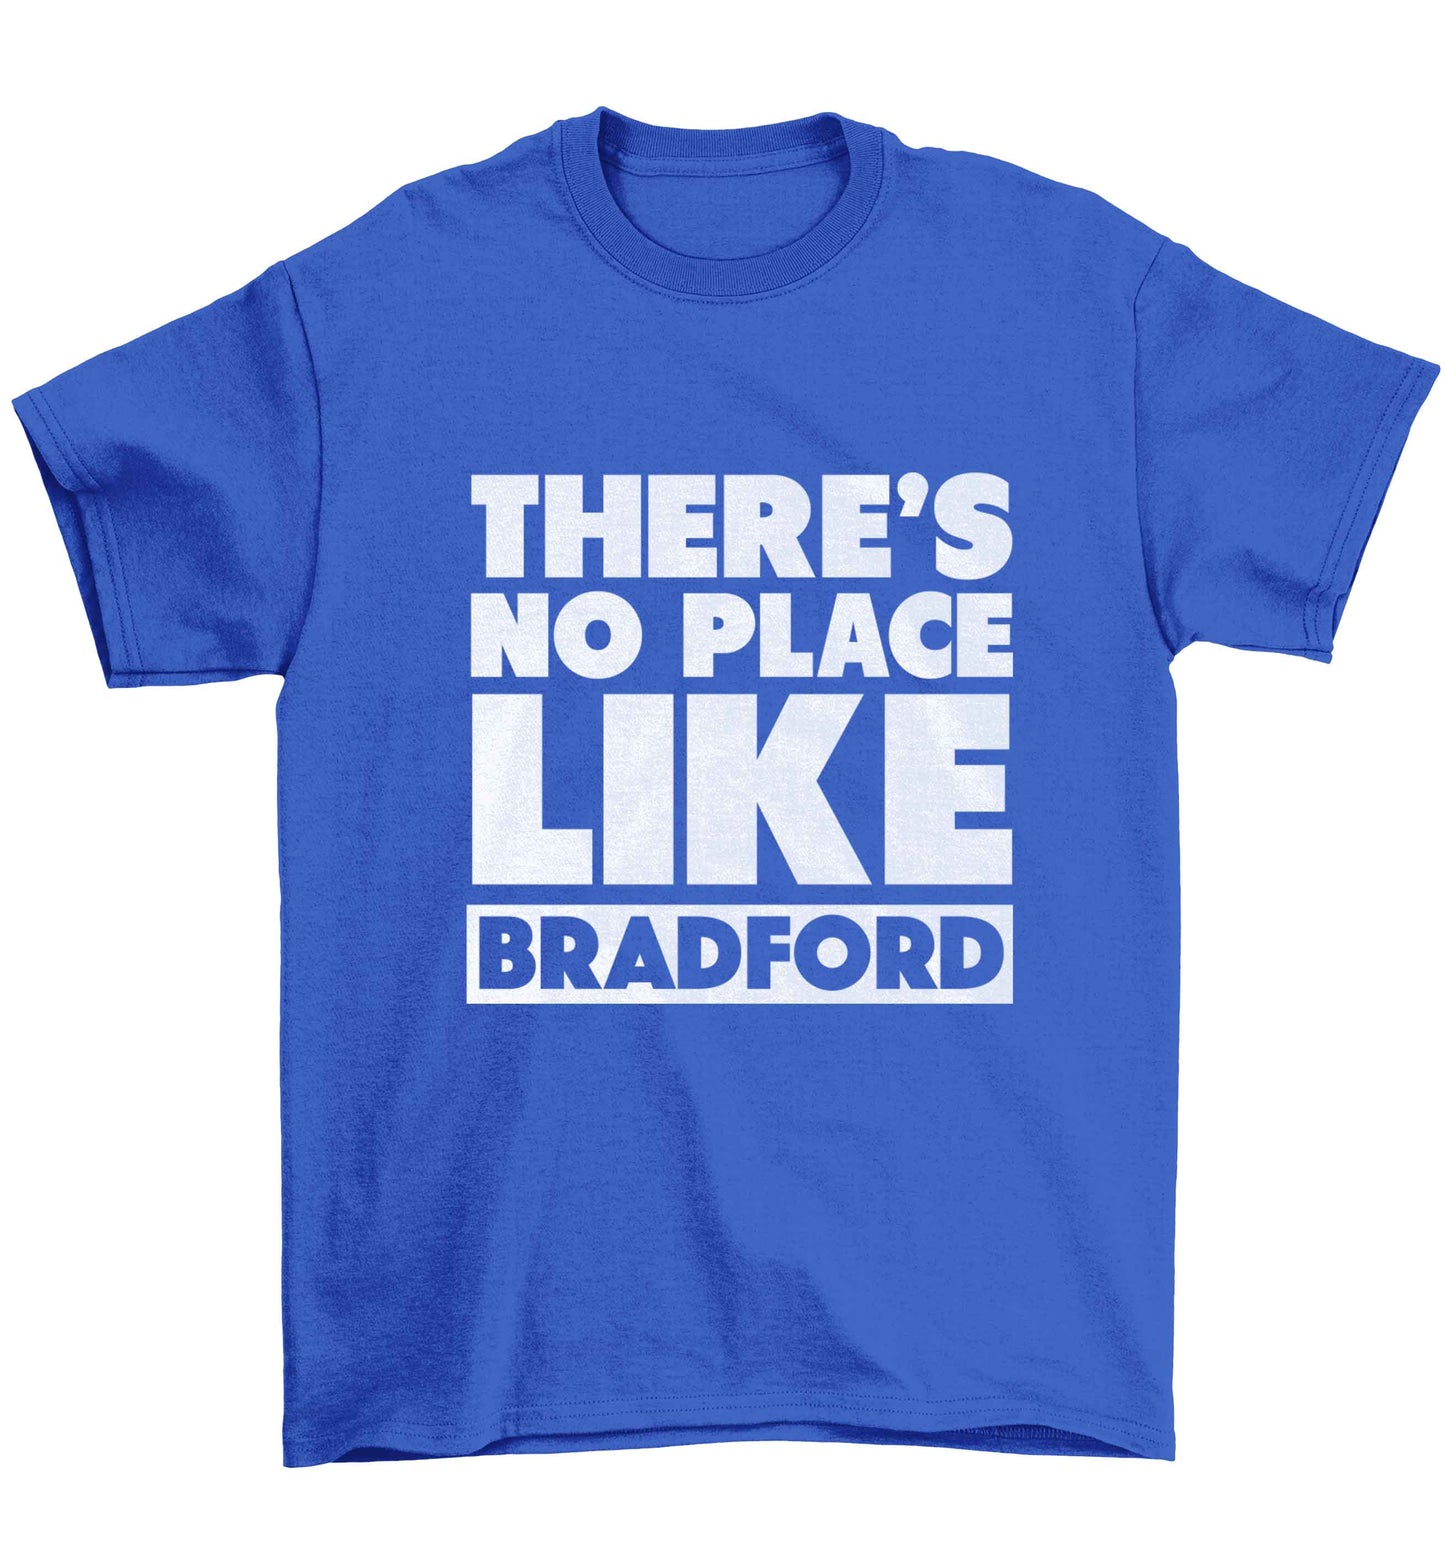 There's no place like Bradford Children's blue Tshirt 12-13 Years